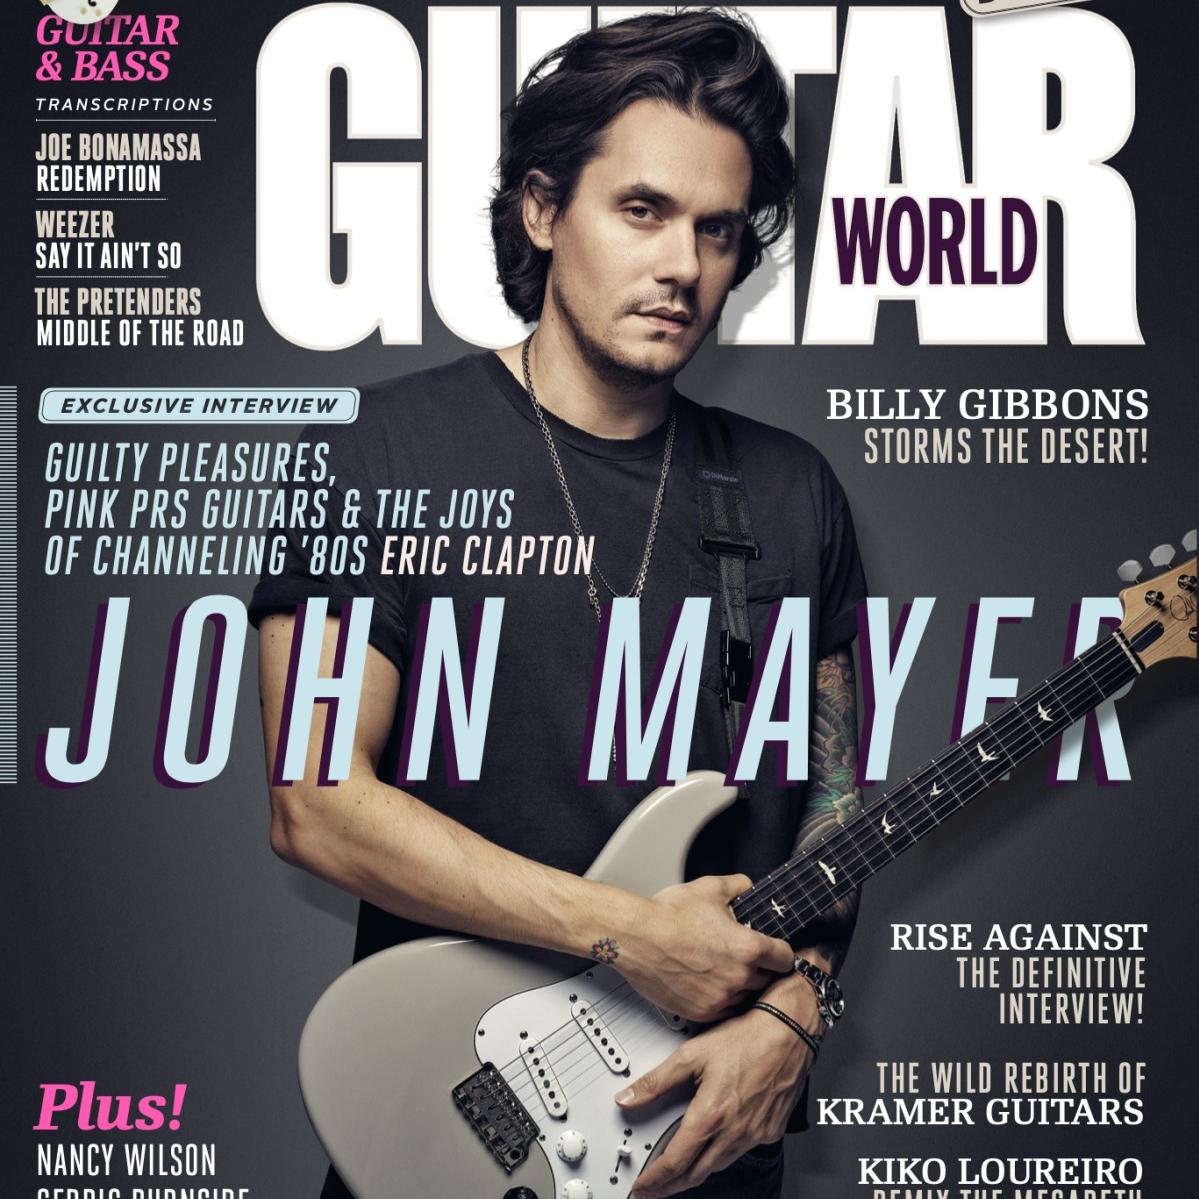 Guitar World October 2021 cover.